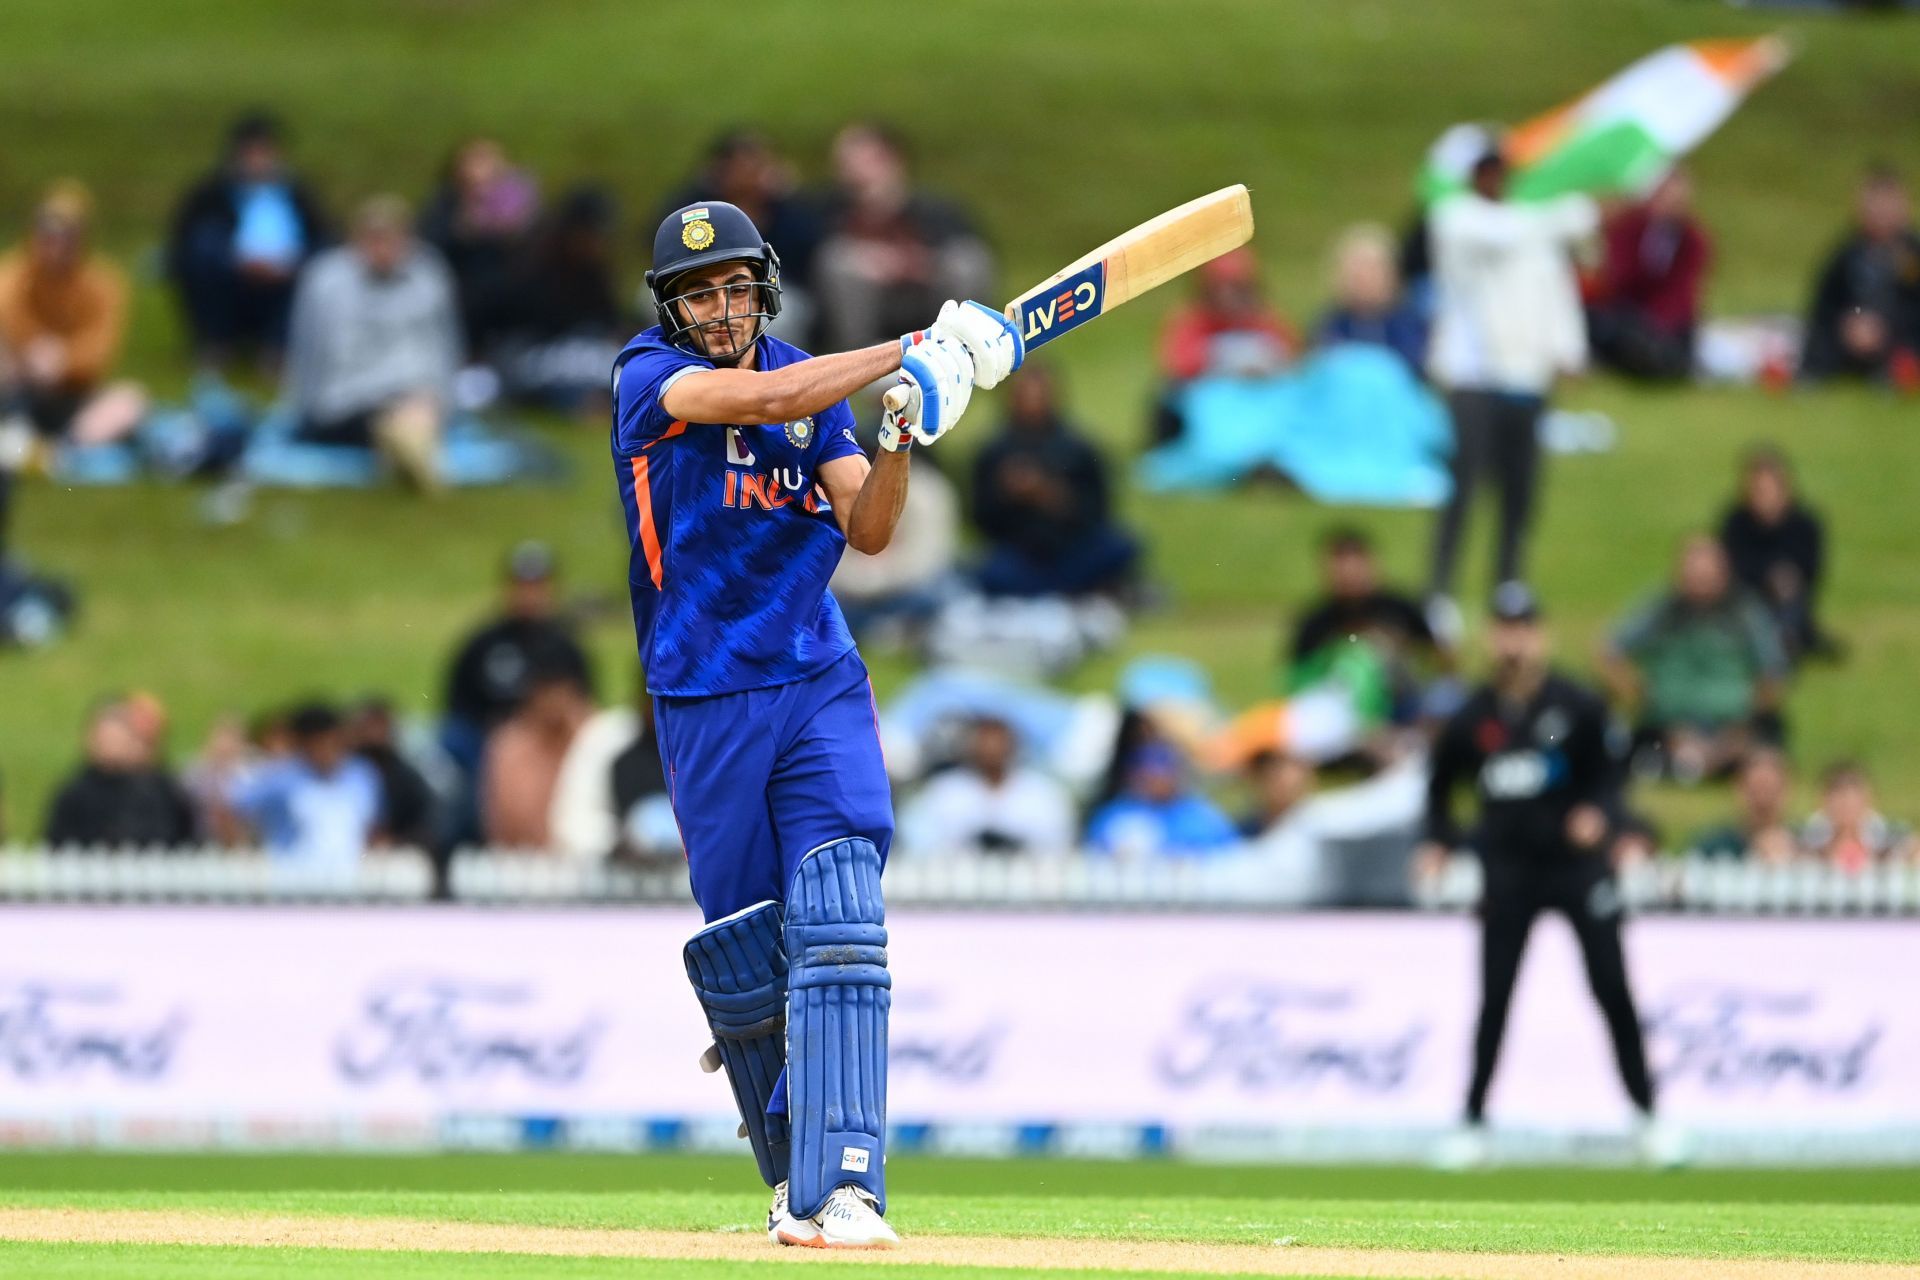 Shubman Gill has cemented his spot in the Indian ODI team with impressive performaces recently